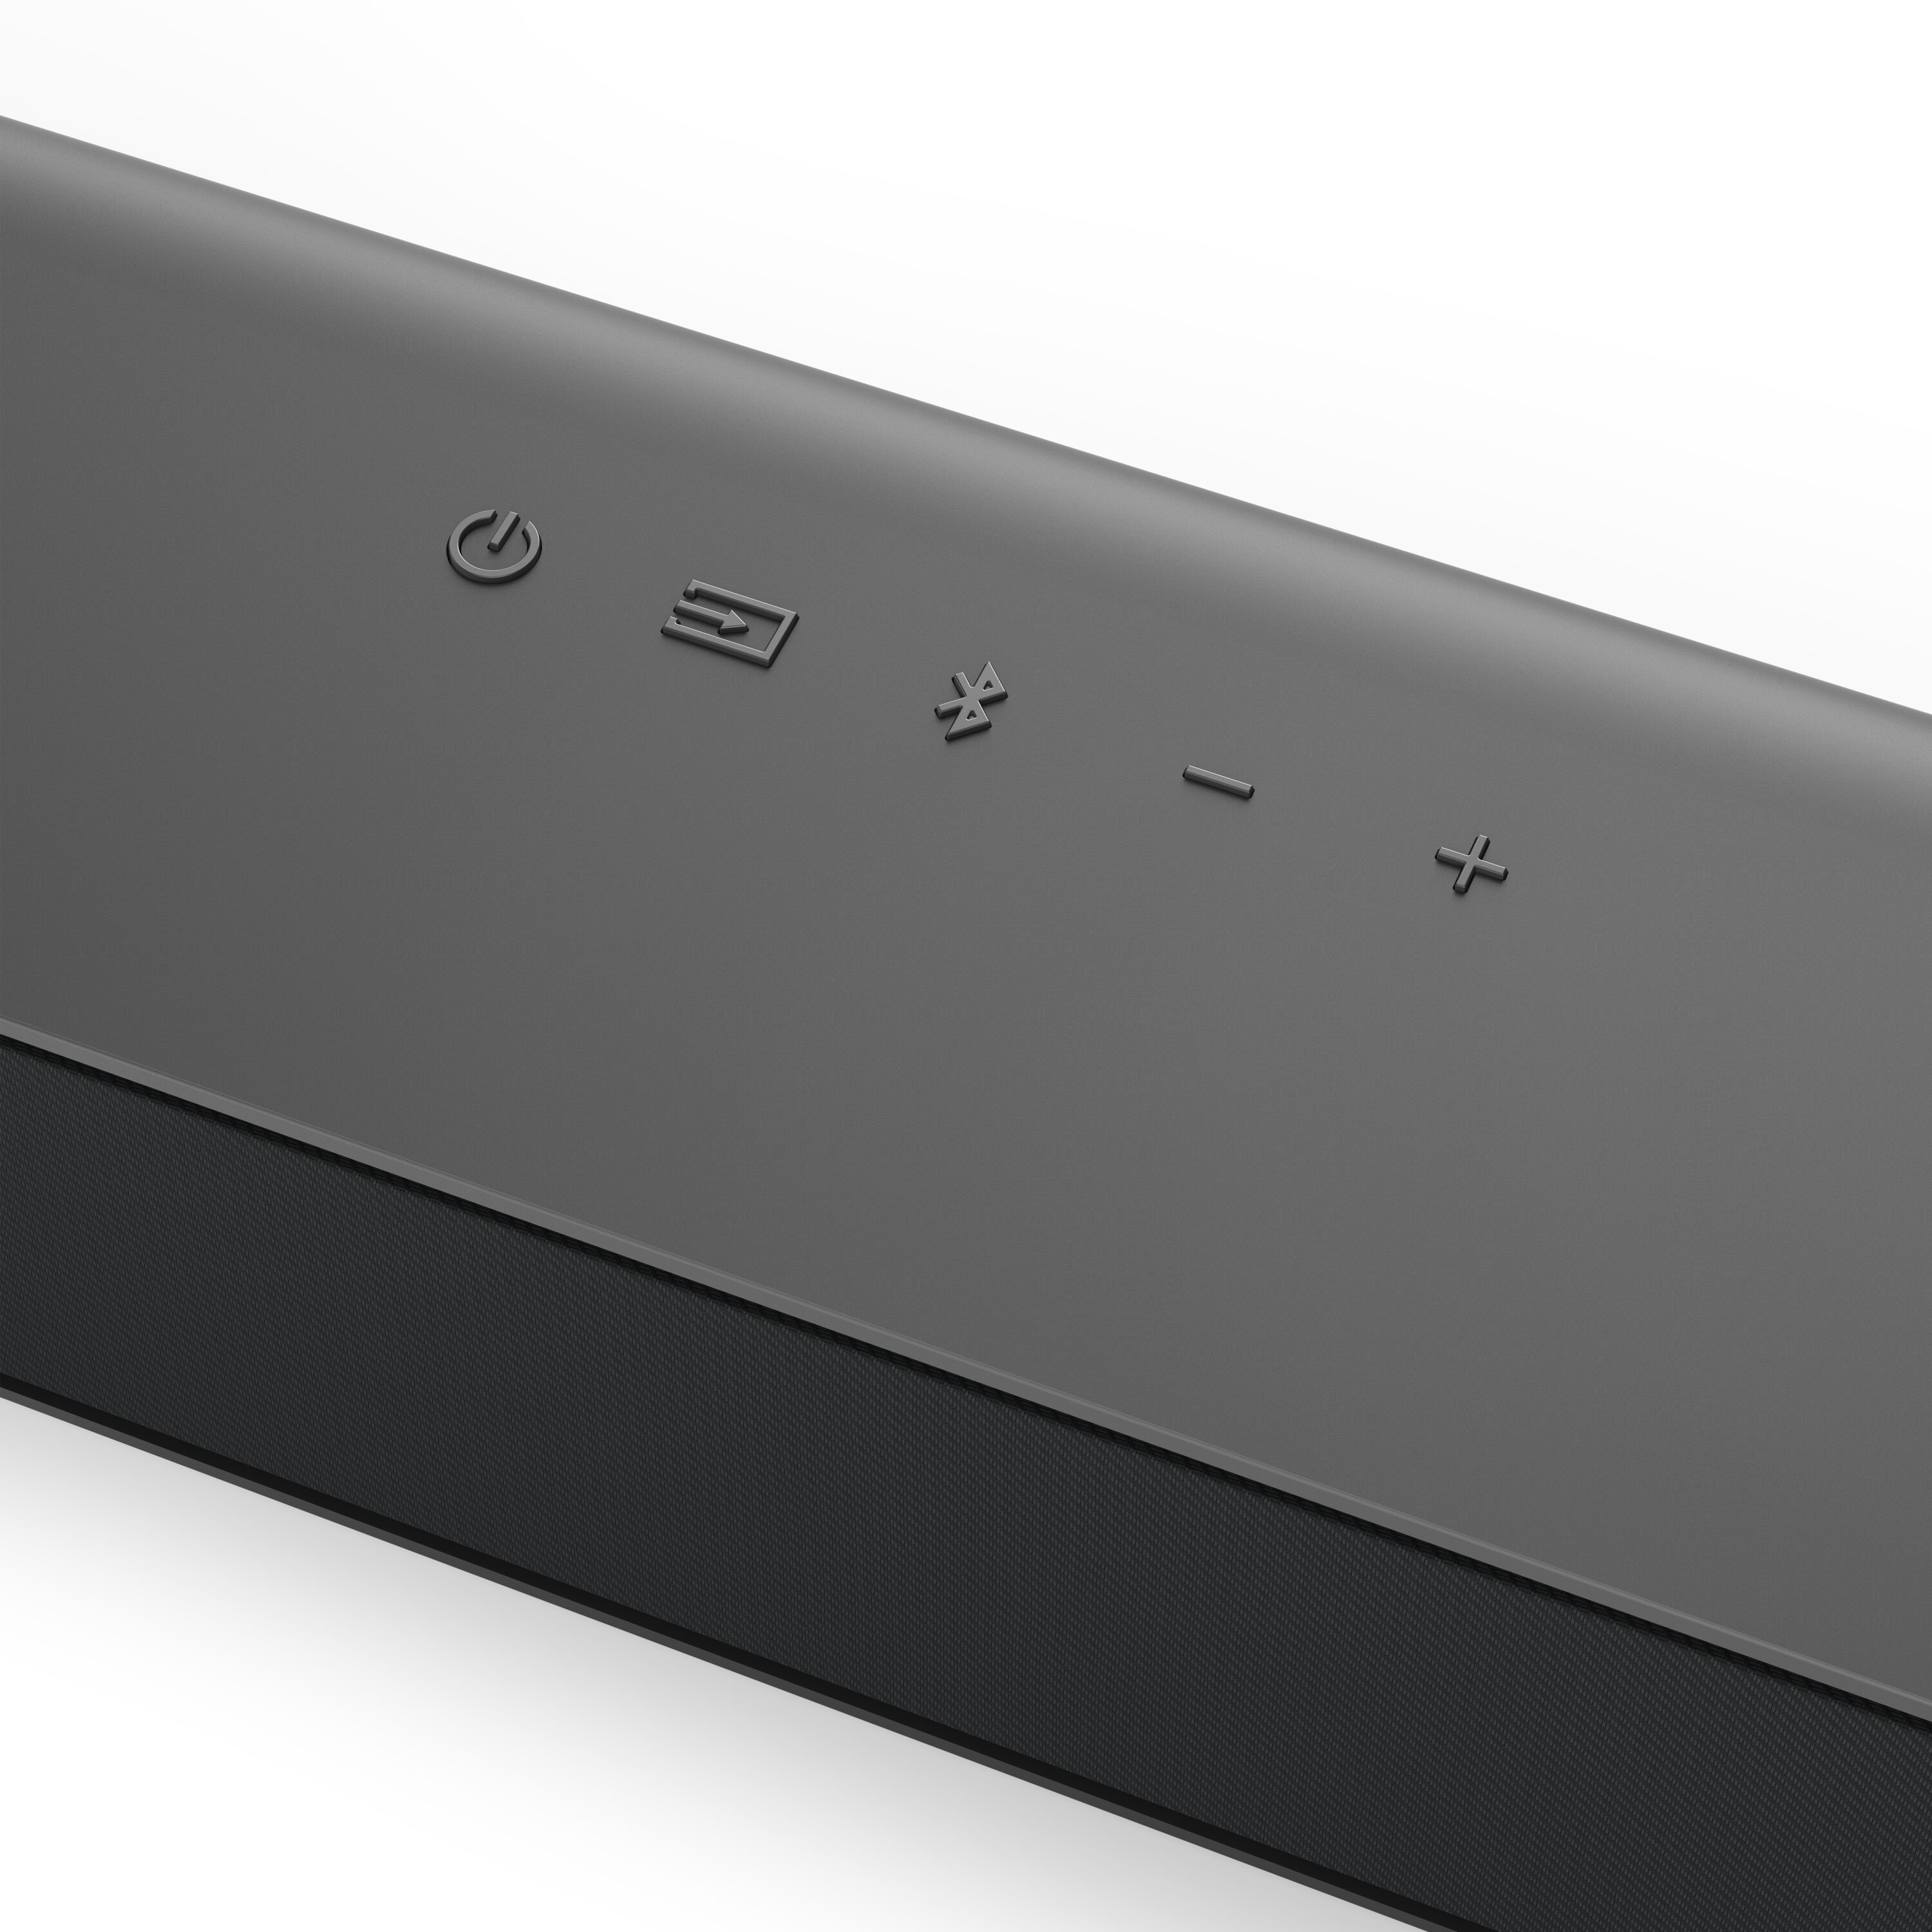 VIZIO M-Series 2.1 Premium Sound Bar with Dolby Atmos, DTS:X, Wireless Subwoofer M215a-J6 - image 13 of 21